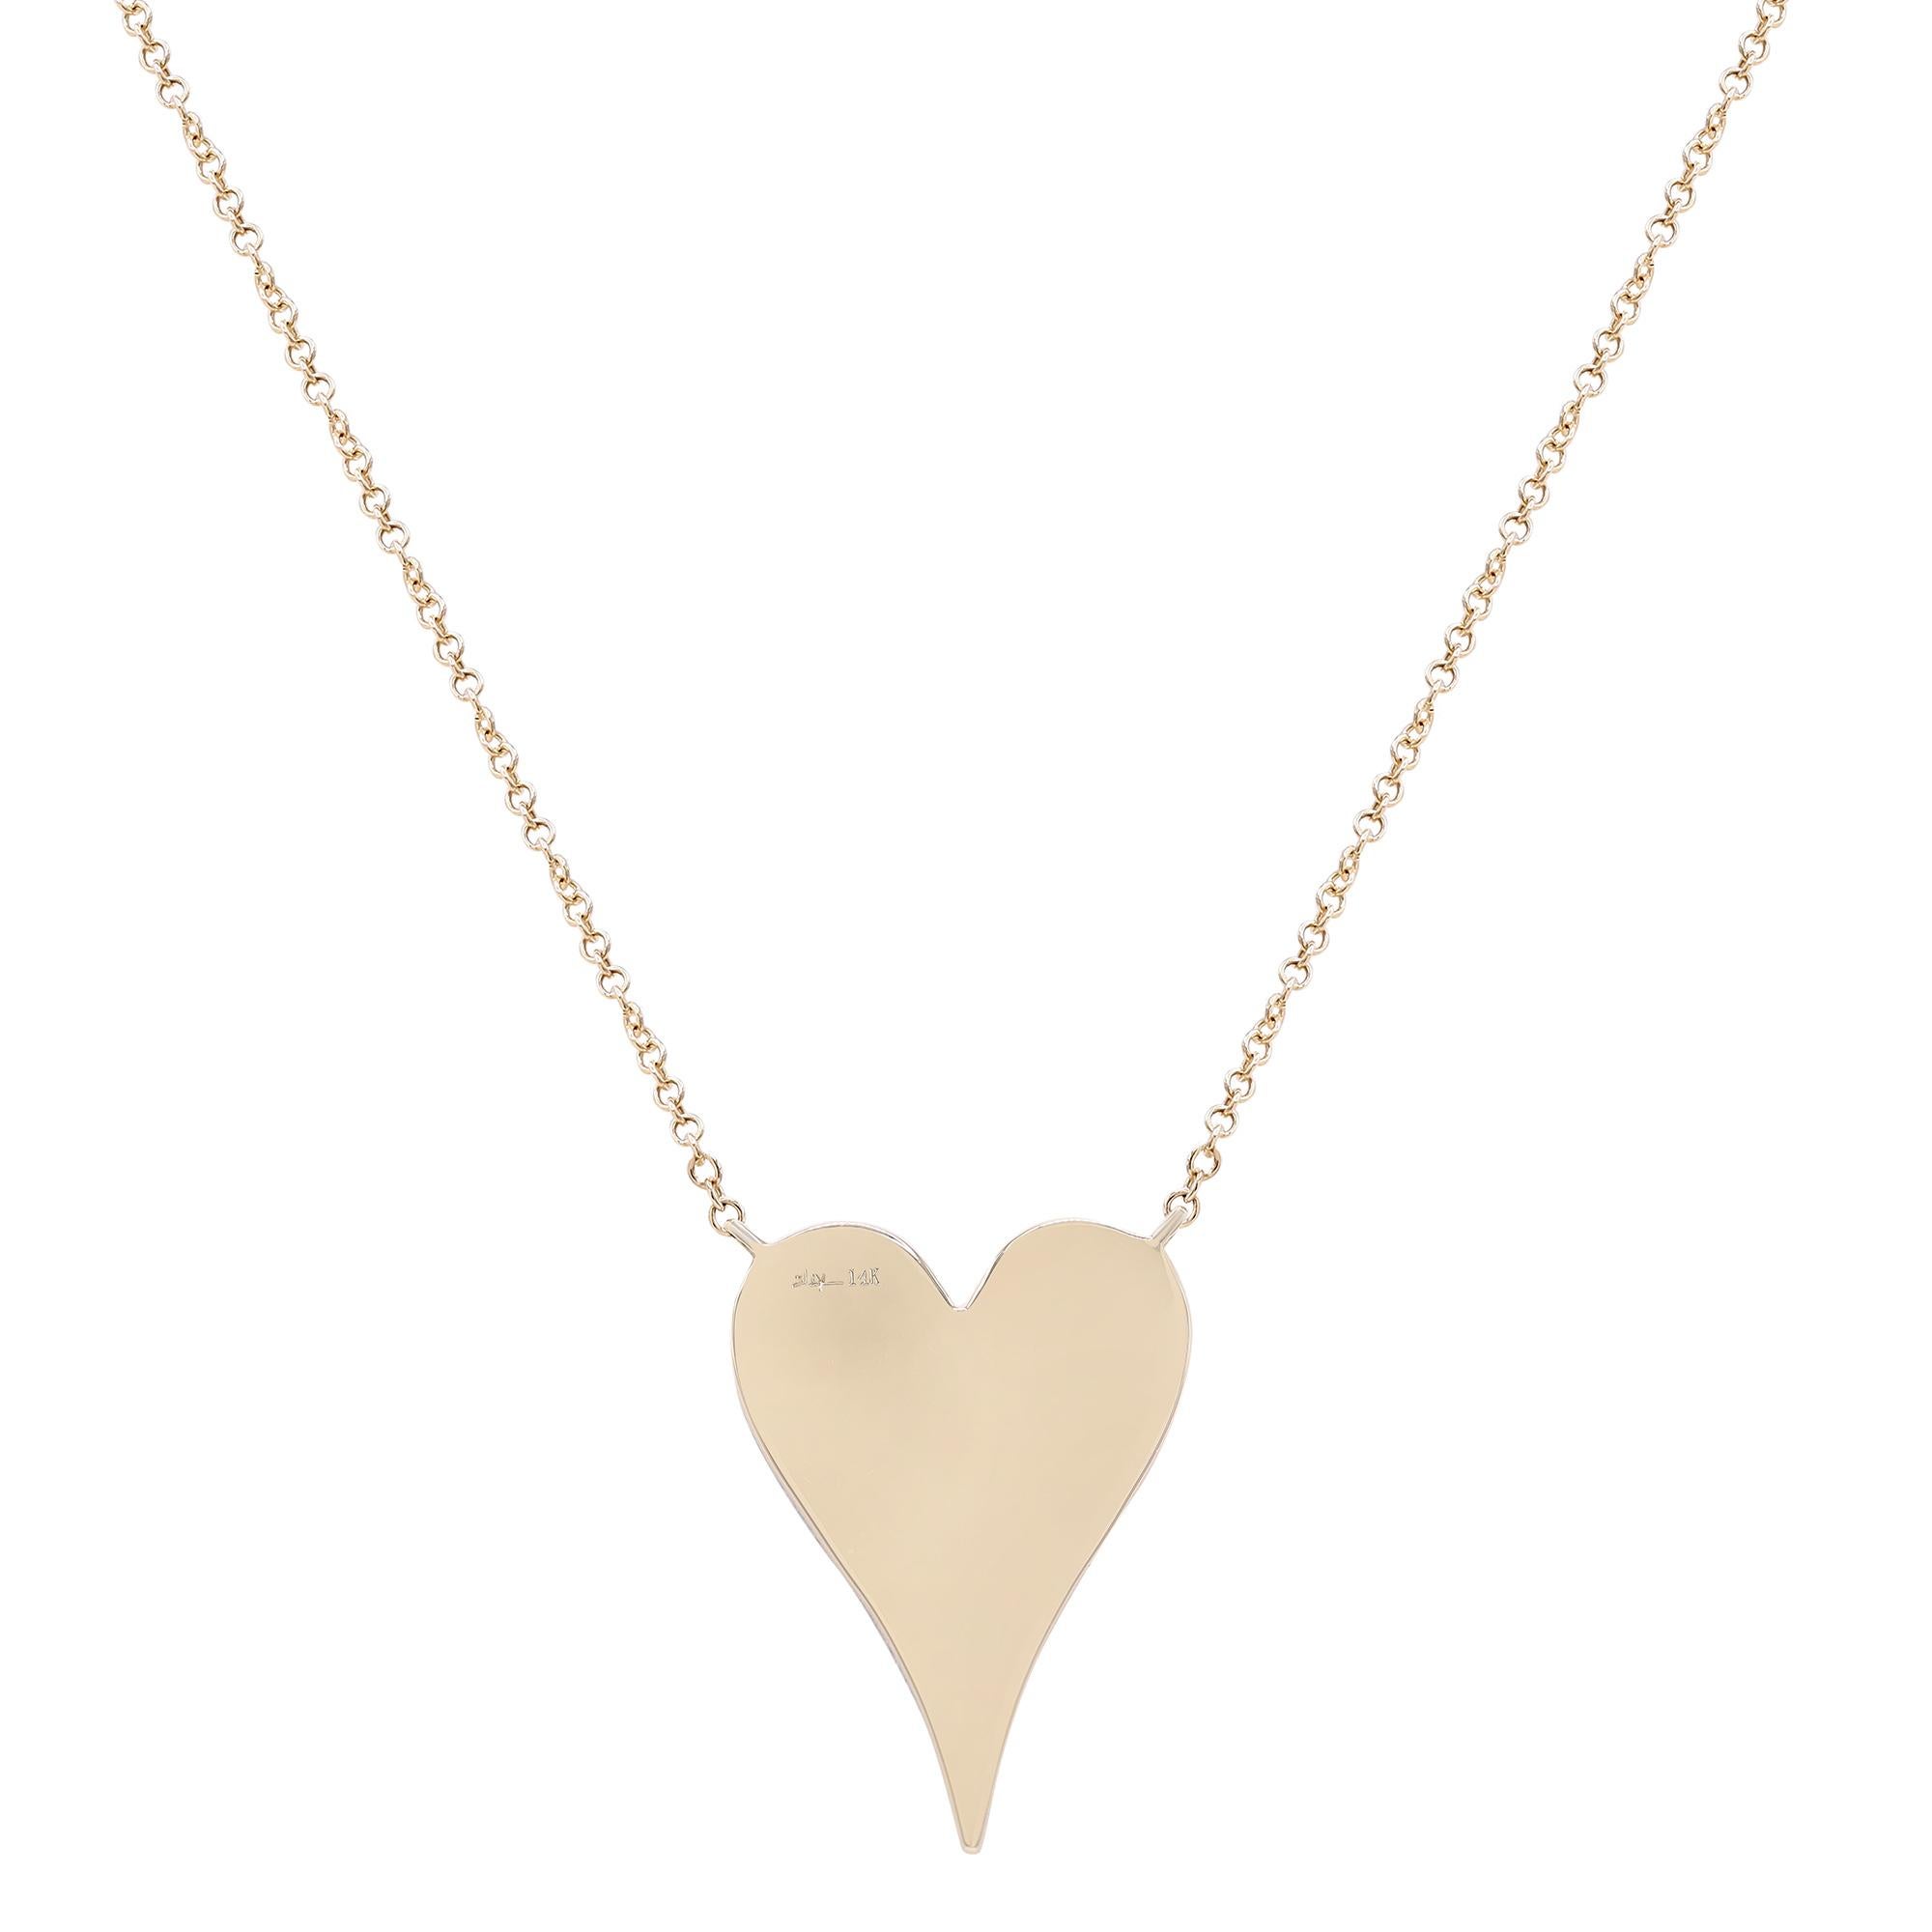 Trendy jewelry with real gold and real diamonds. This beautiful, delicate and precious diamond necklace will leave everyone speechless the moment they see it. Crafted in high polished solid 14k yellow gold. This necklace is set with tiny brilliant